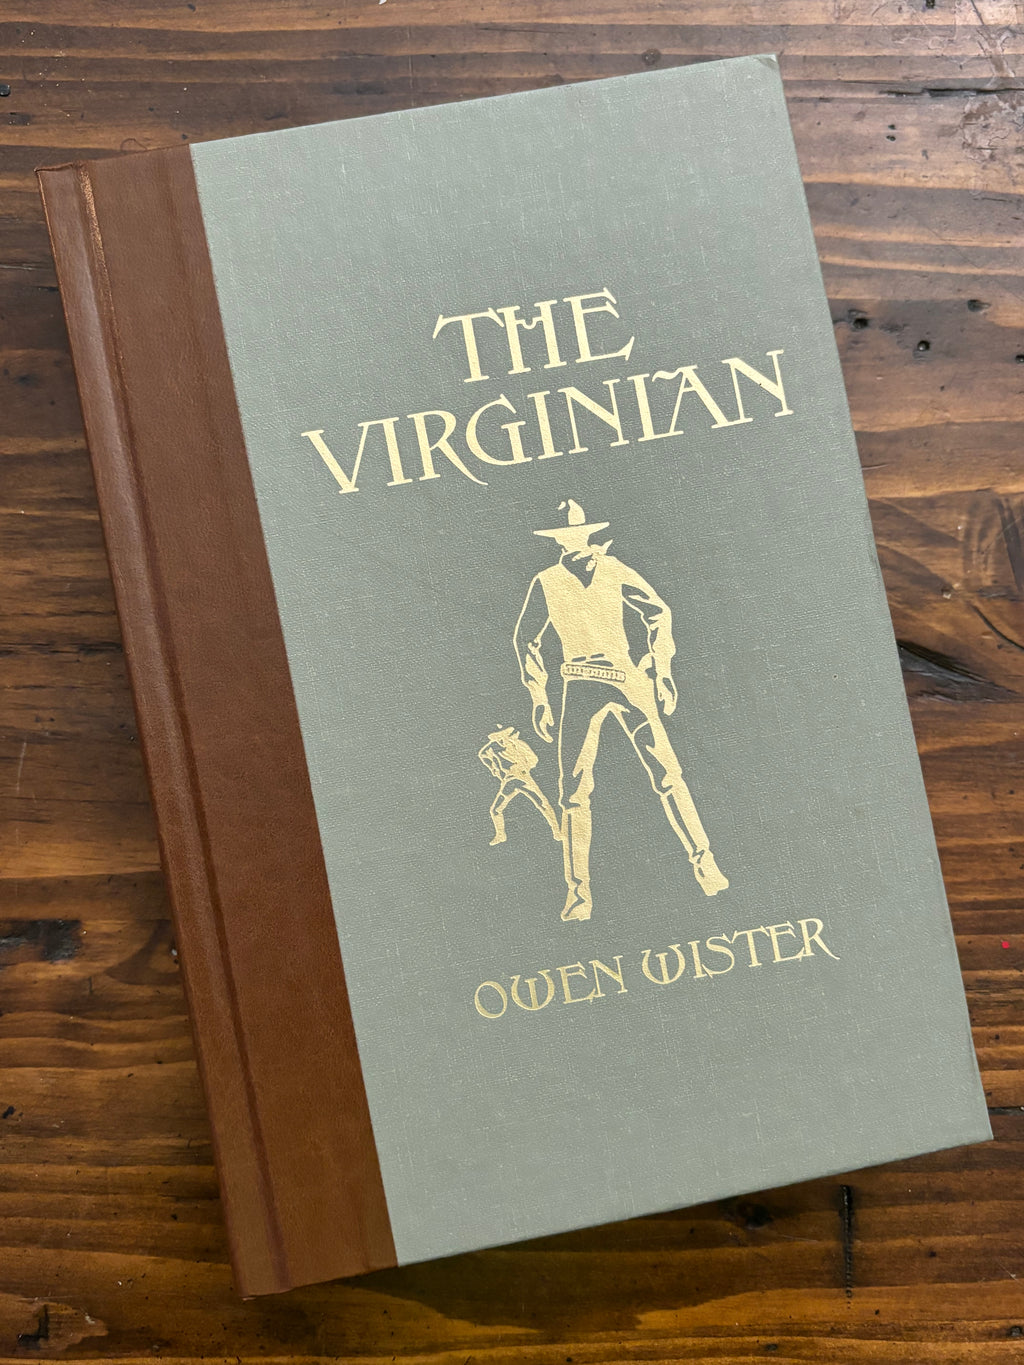 The Virginian- By Owen Wister (Readers Digest Edition)